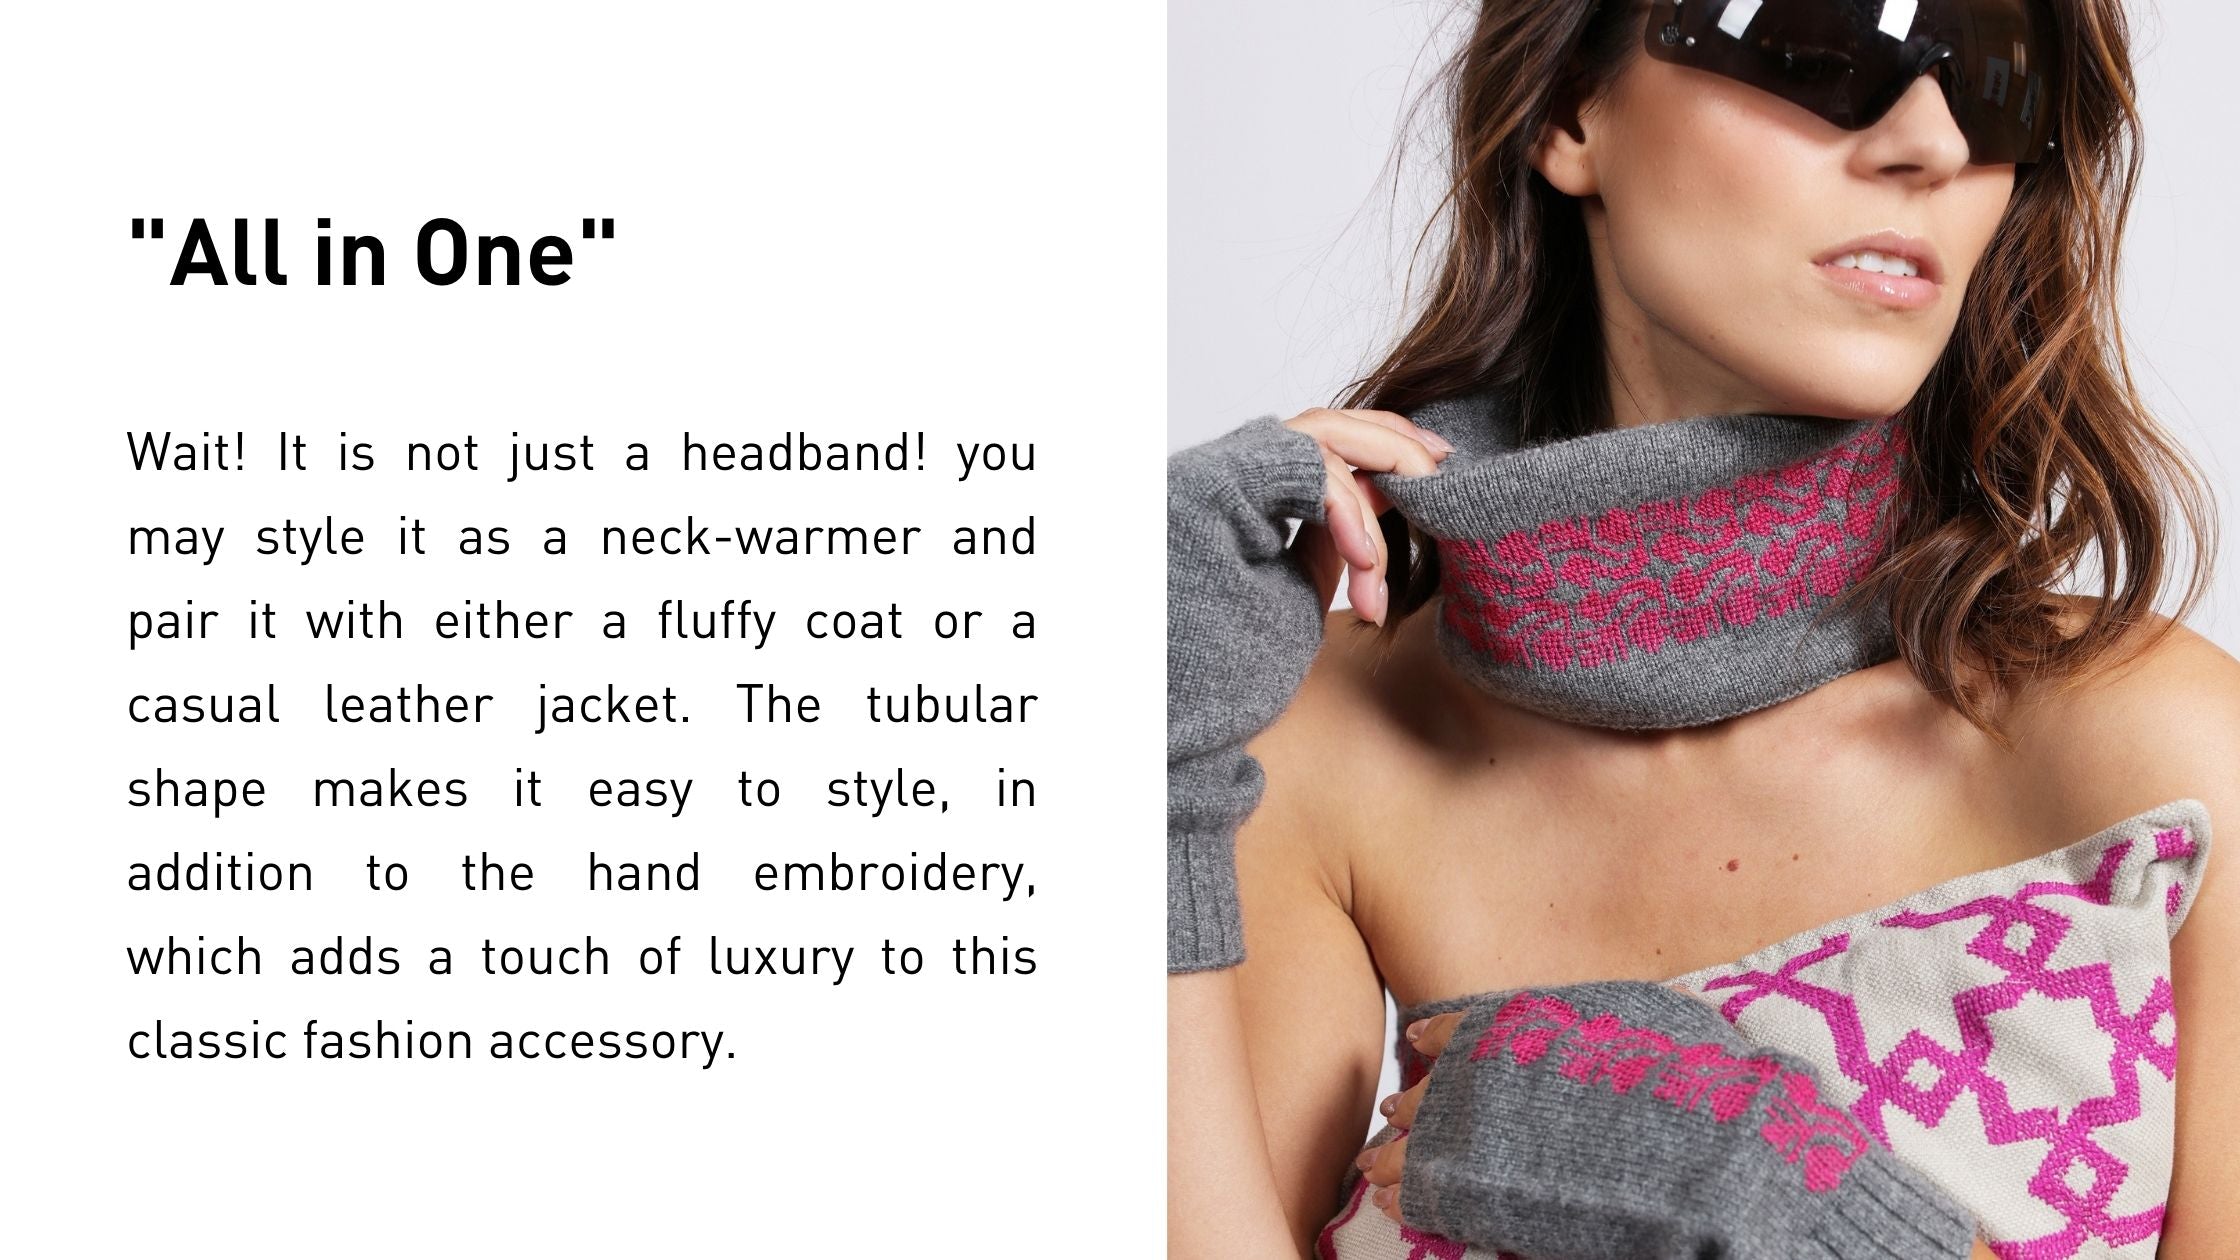 Wait! It is not just a headband! you may style it as a neck-warmer and pair it with either a fluffy coat or a casual leather jacket. The tubular shape makes it easy to style, in addition to the hand embroidery, which adds a touch of luxury to this classic fashion accessory.